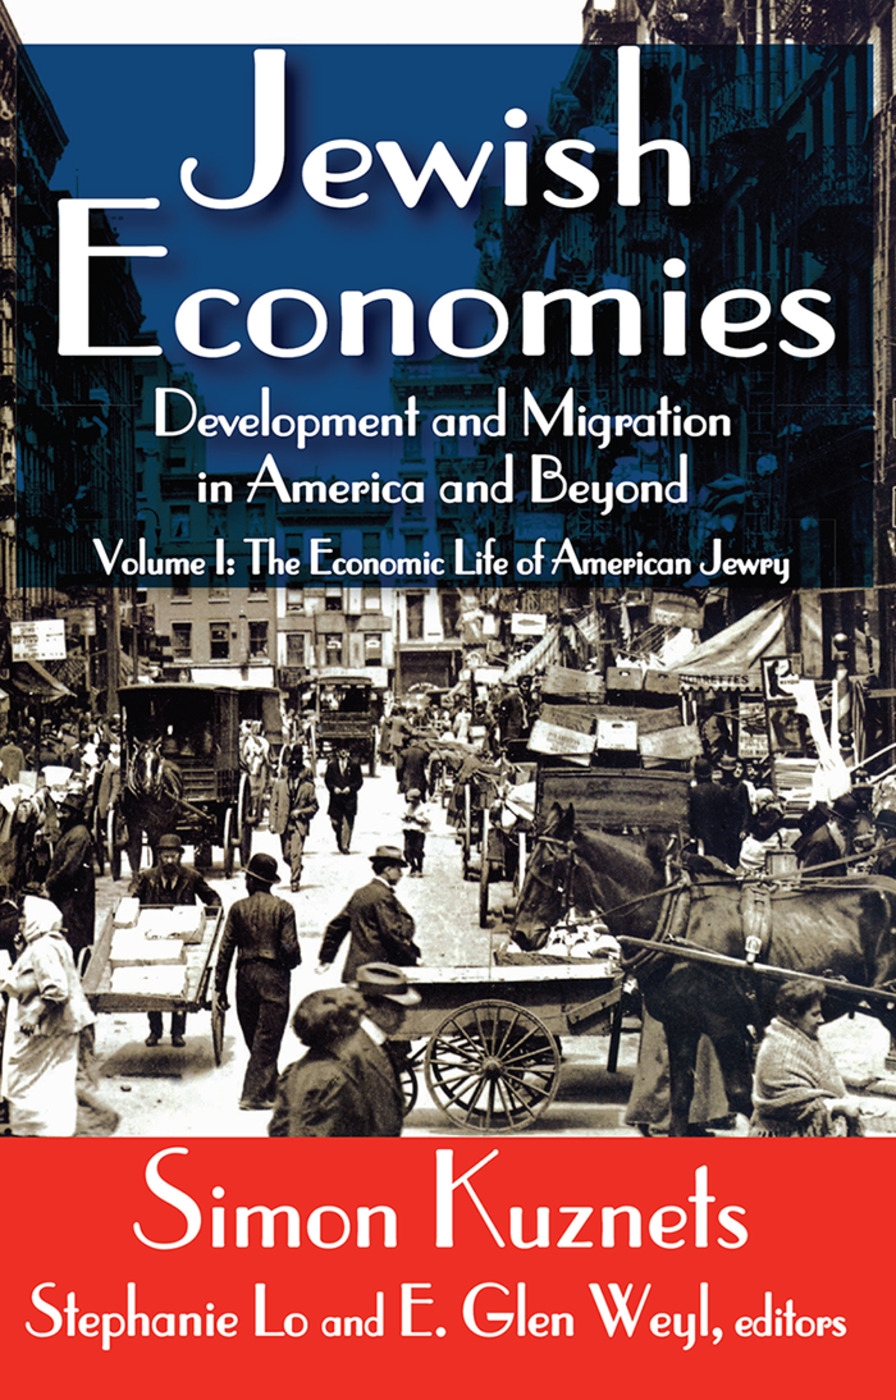 Jewish Economies: Development and Migration in America and Beyond: The Economic Life of American Jewry